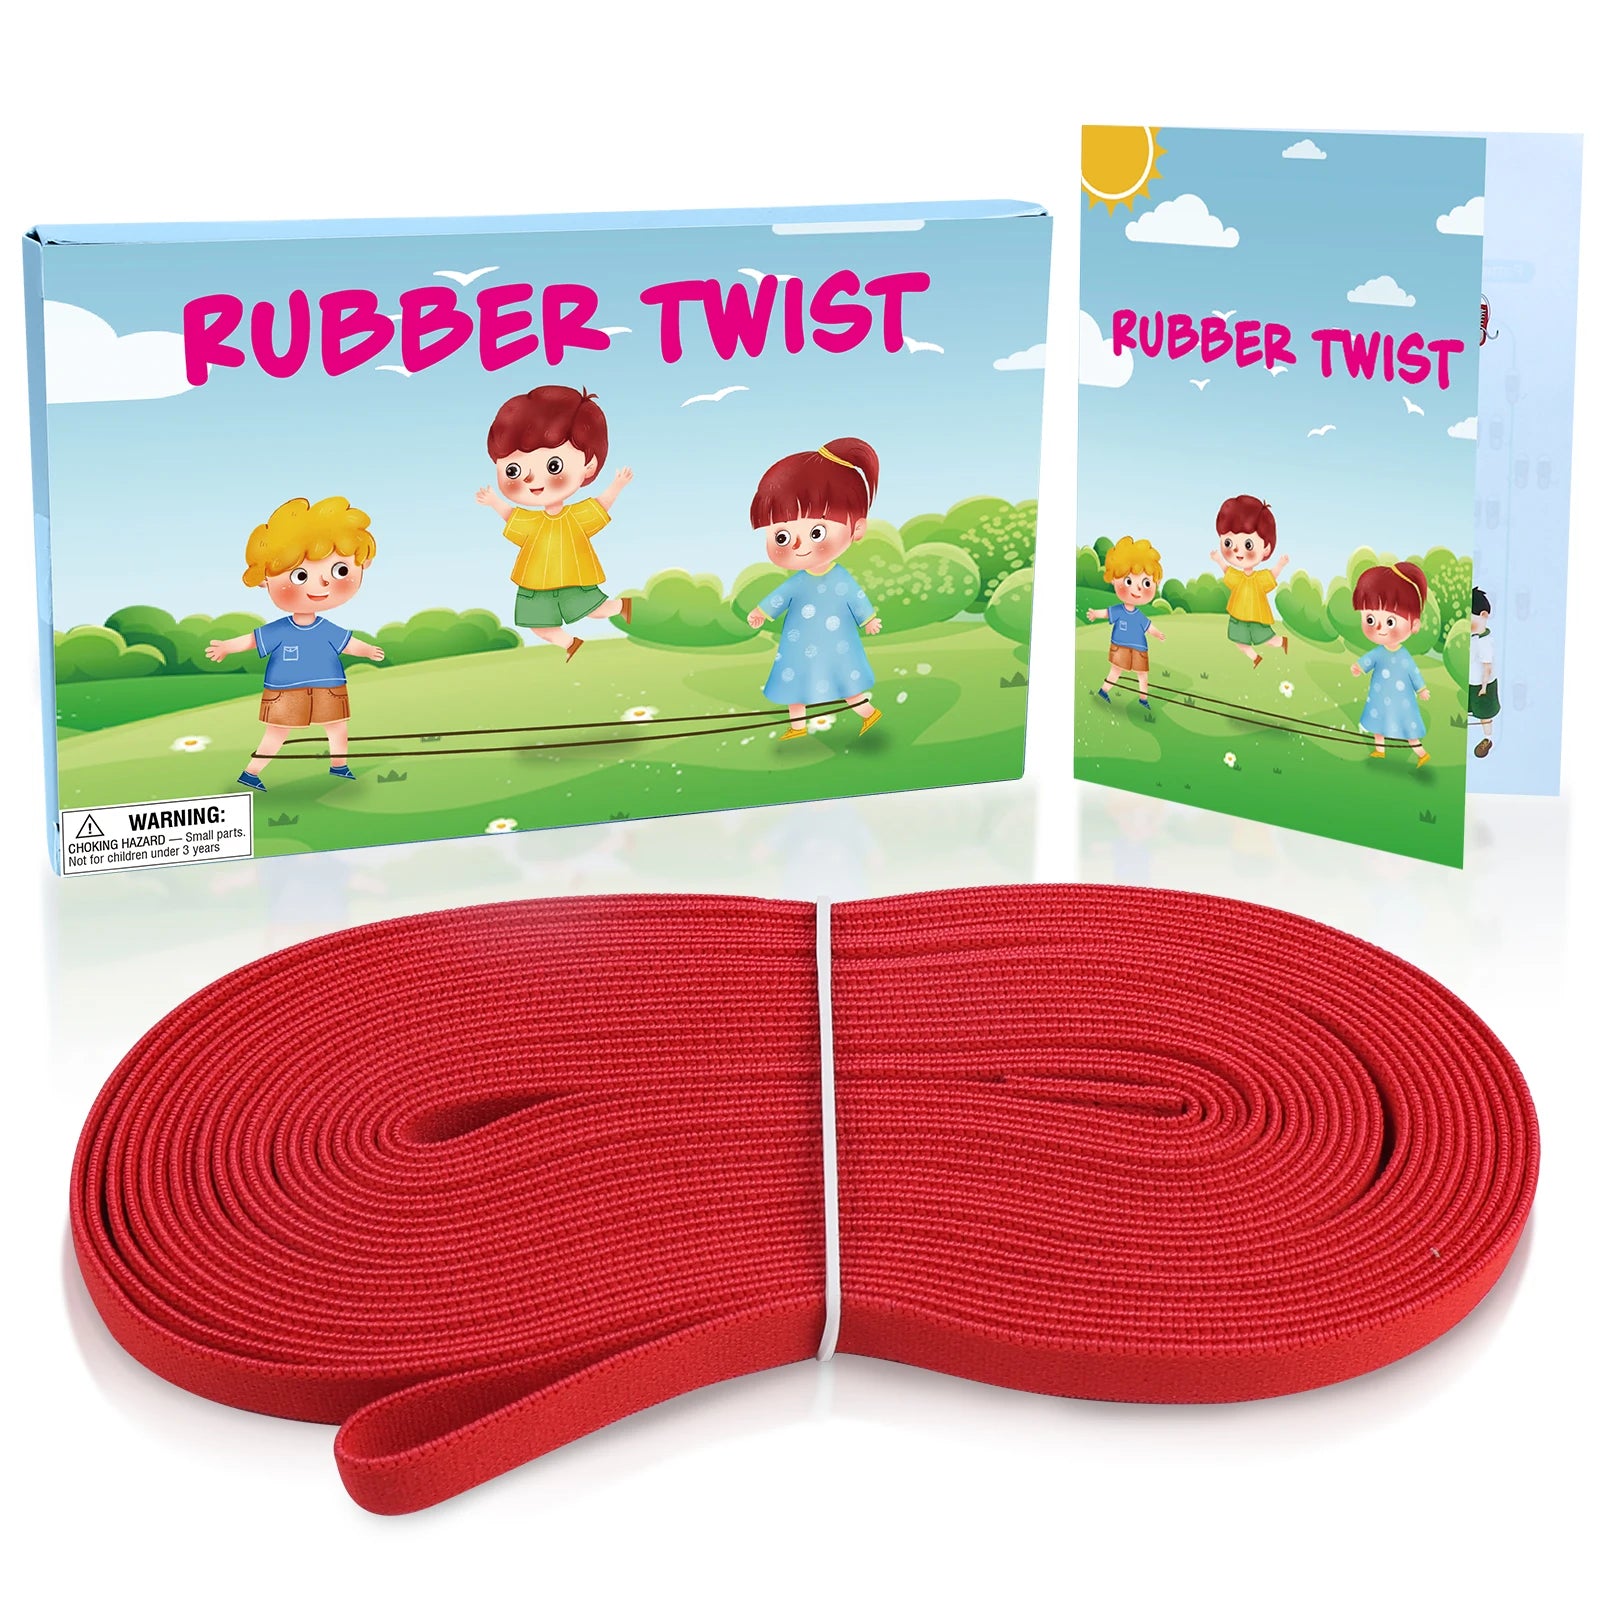 Elastic Rubber Jump Rope 4Meters Long Interactive Multiplayer Games for Outdoor and Sports Ideal Gift for Girls and Boys aged 3+